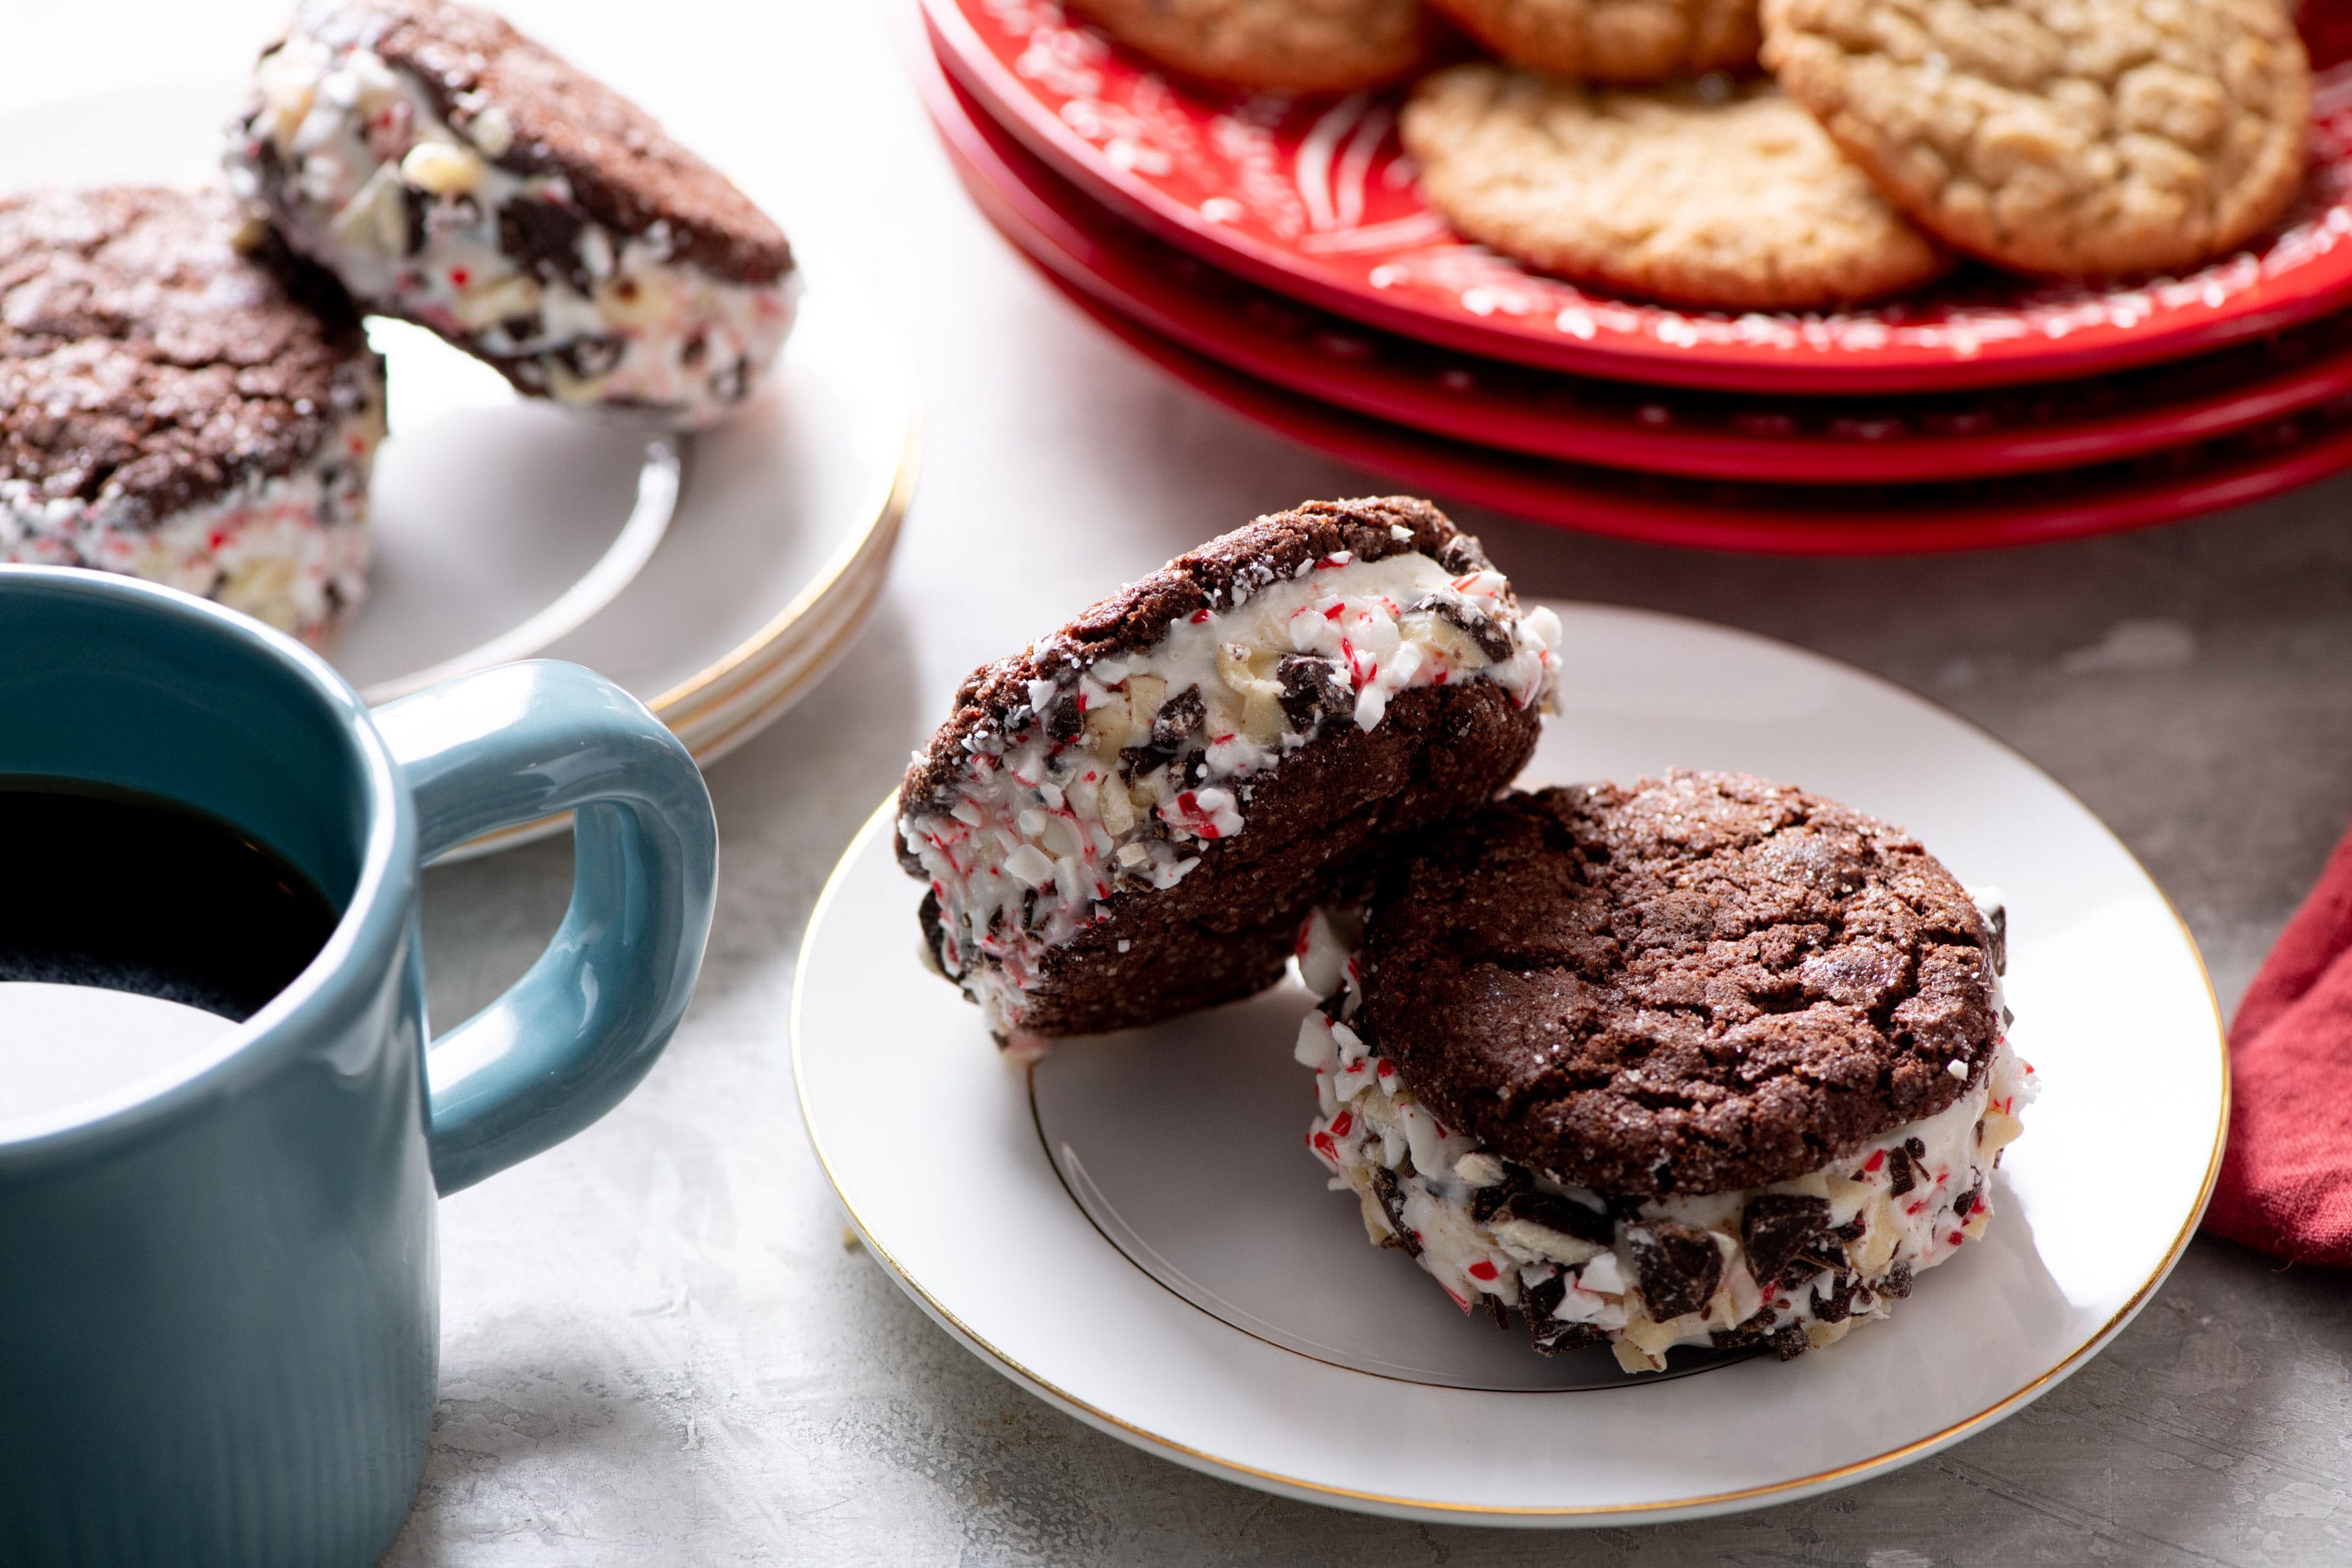 Two chocolate cookie ice cream sandwiches on a plate.